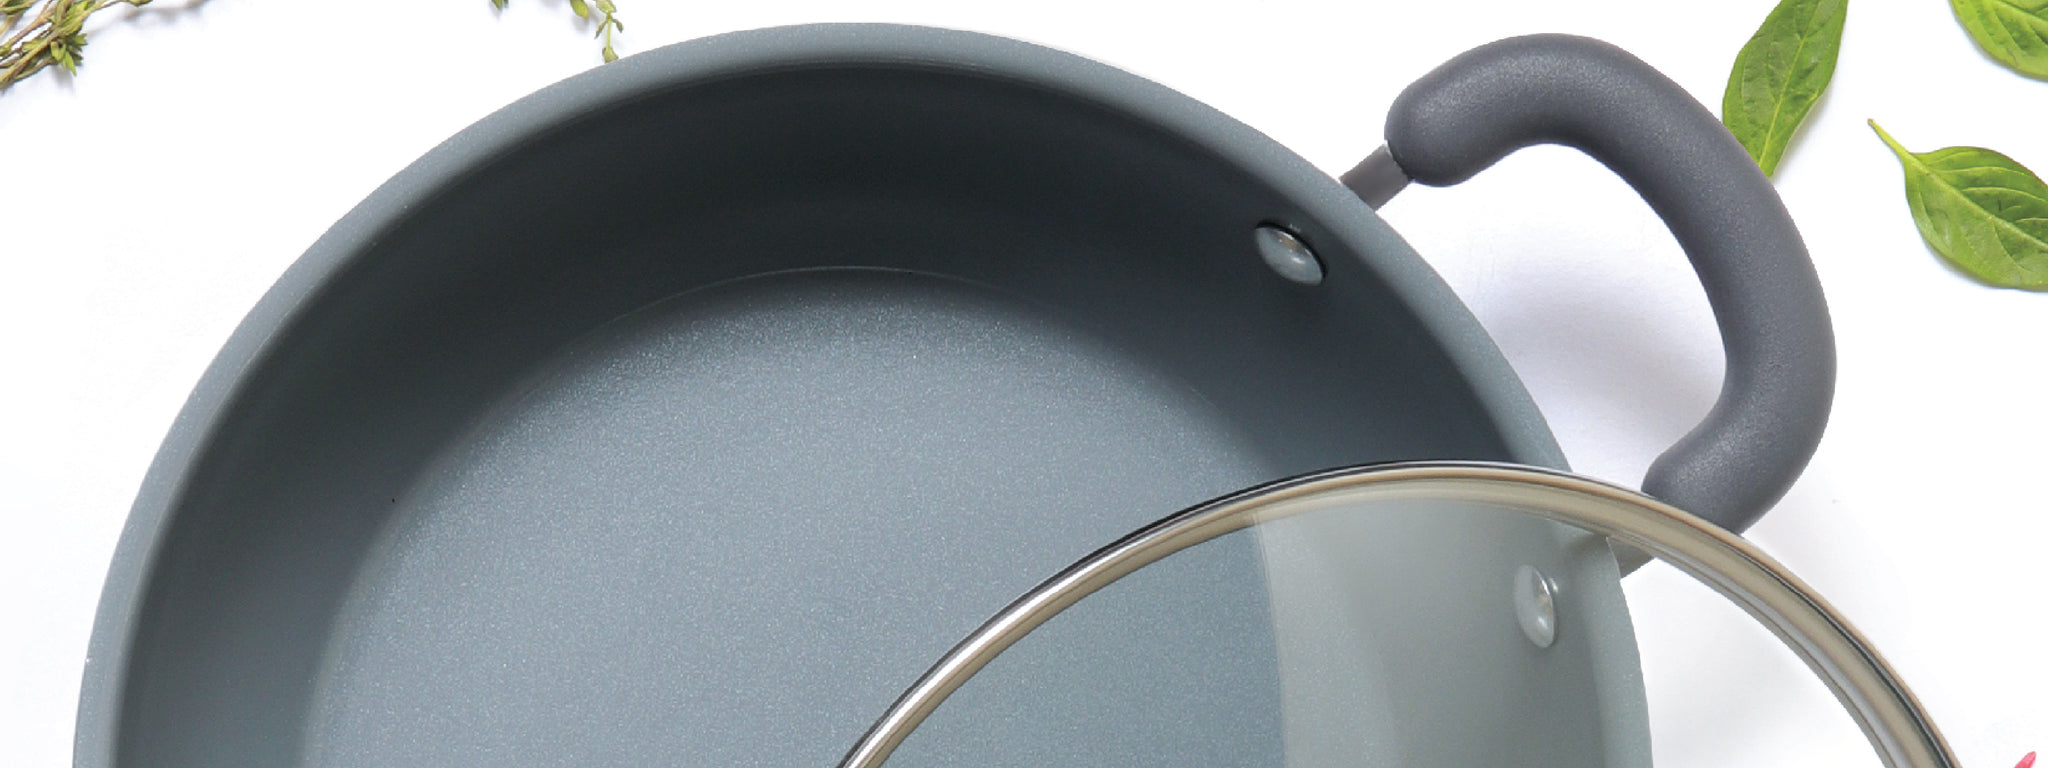 Looking for an alternative for a Teflon pan? Check out all options